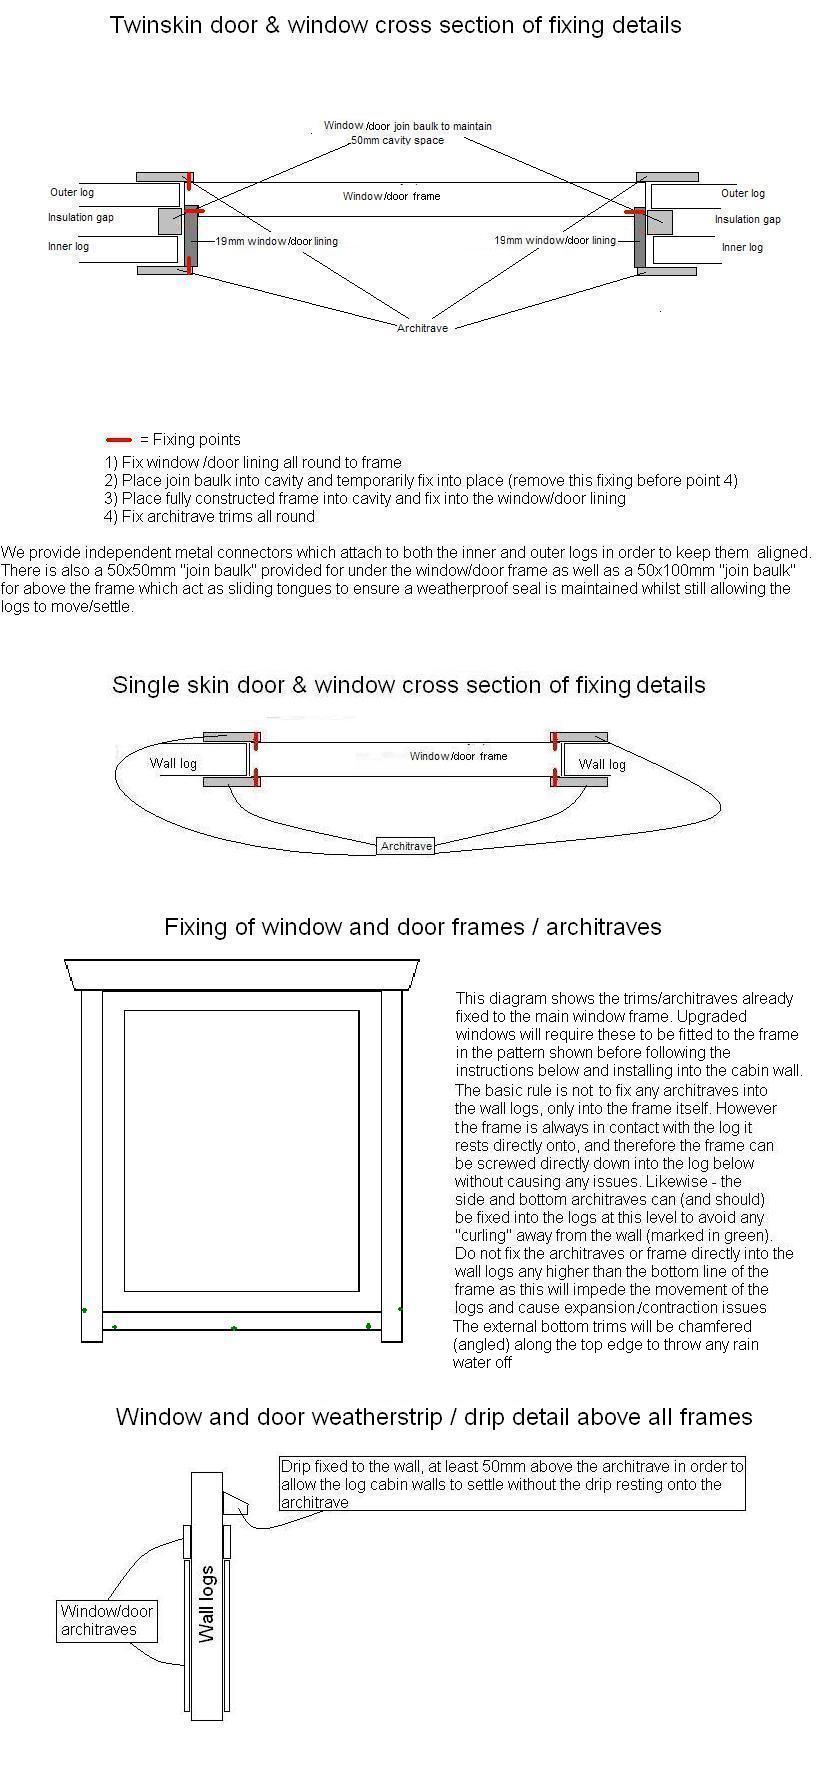 How to fit windows and doors into log cabins